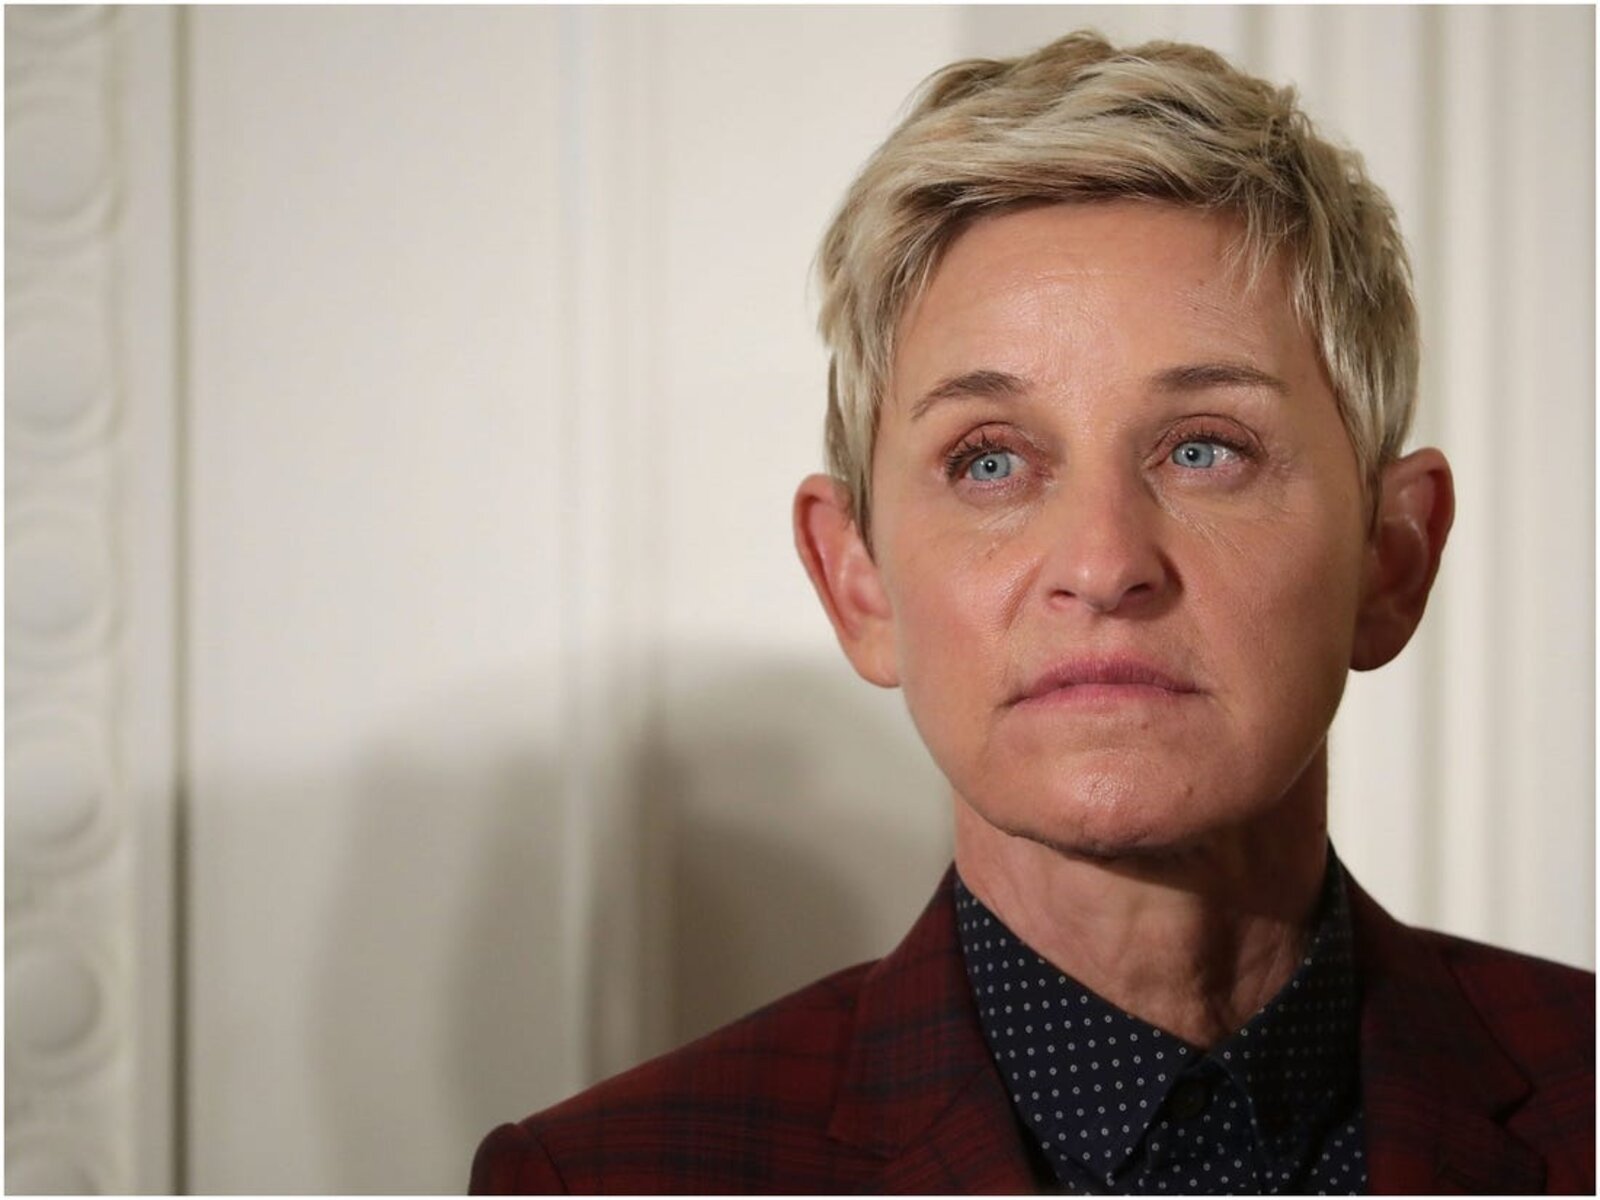 'The Ellen DeGeneres Show' continues to be under fire for both Ellen's behavior and her staff. These allegations prove it's not just Ellen being mean.